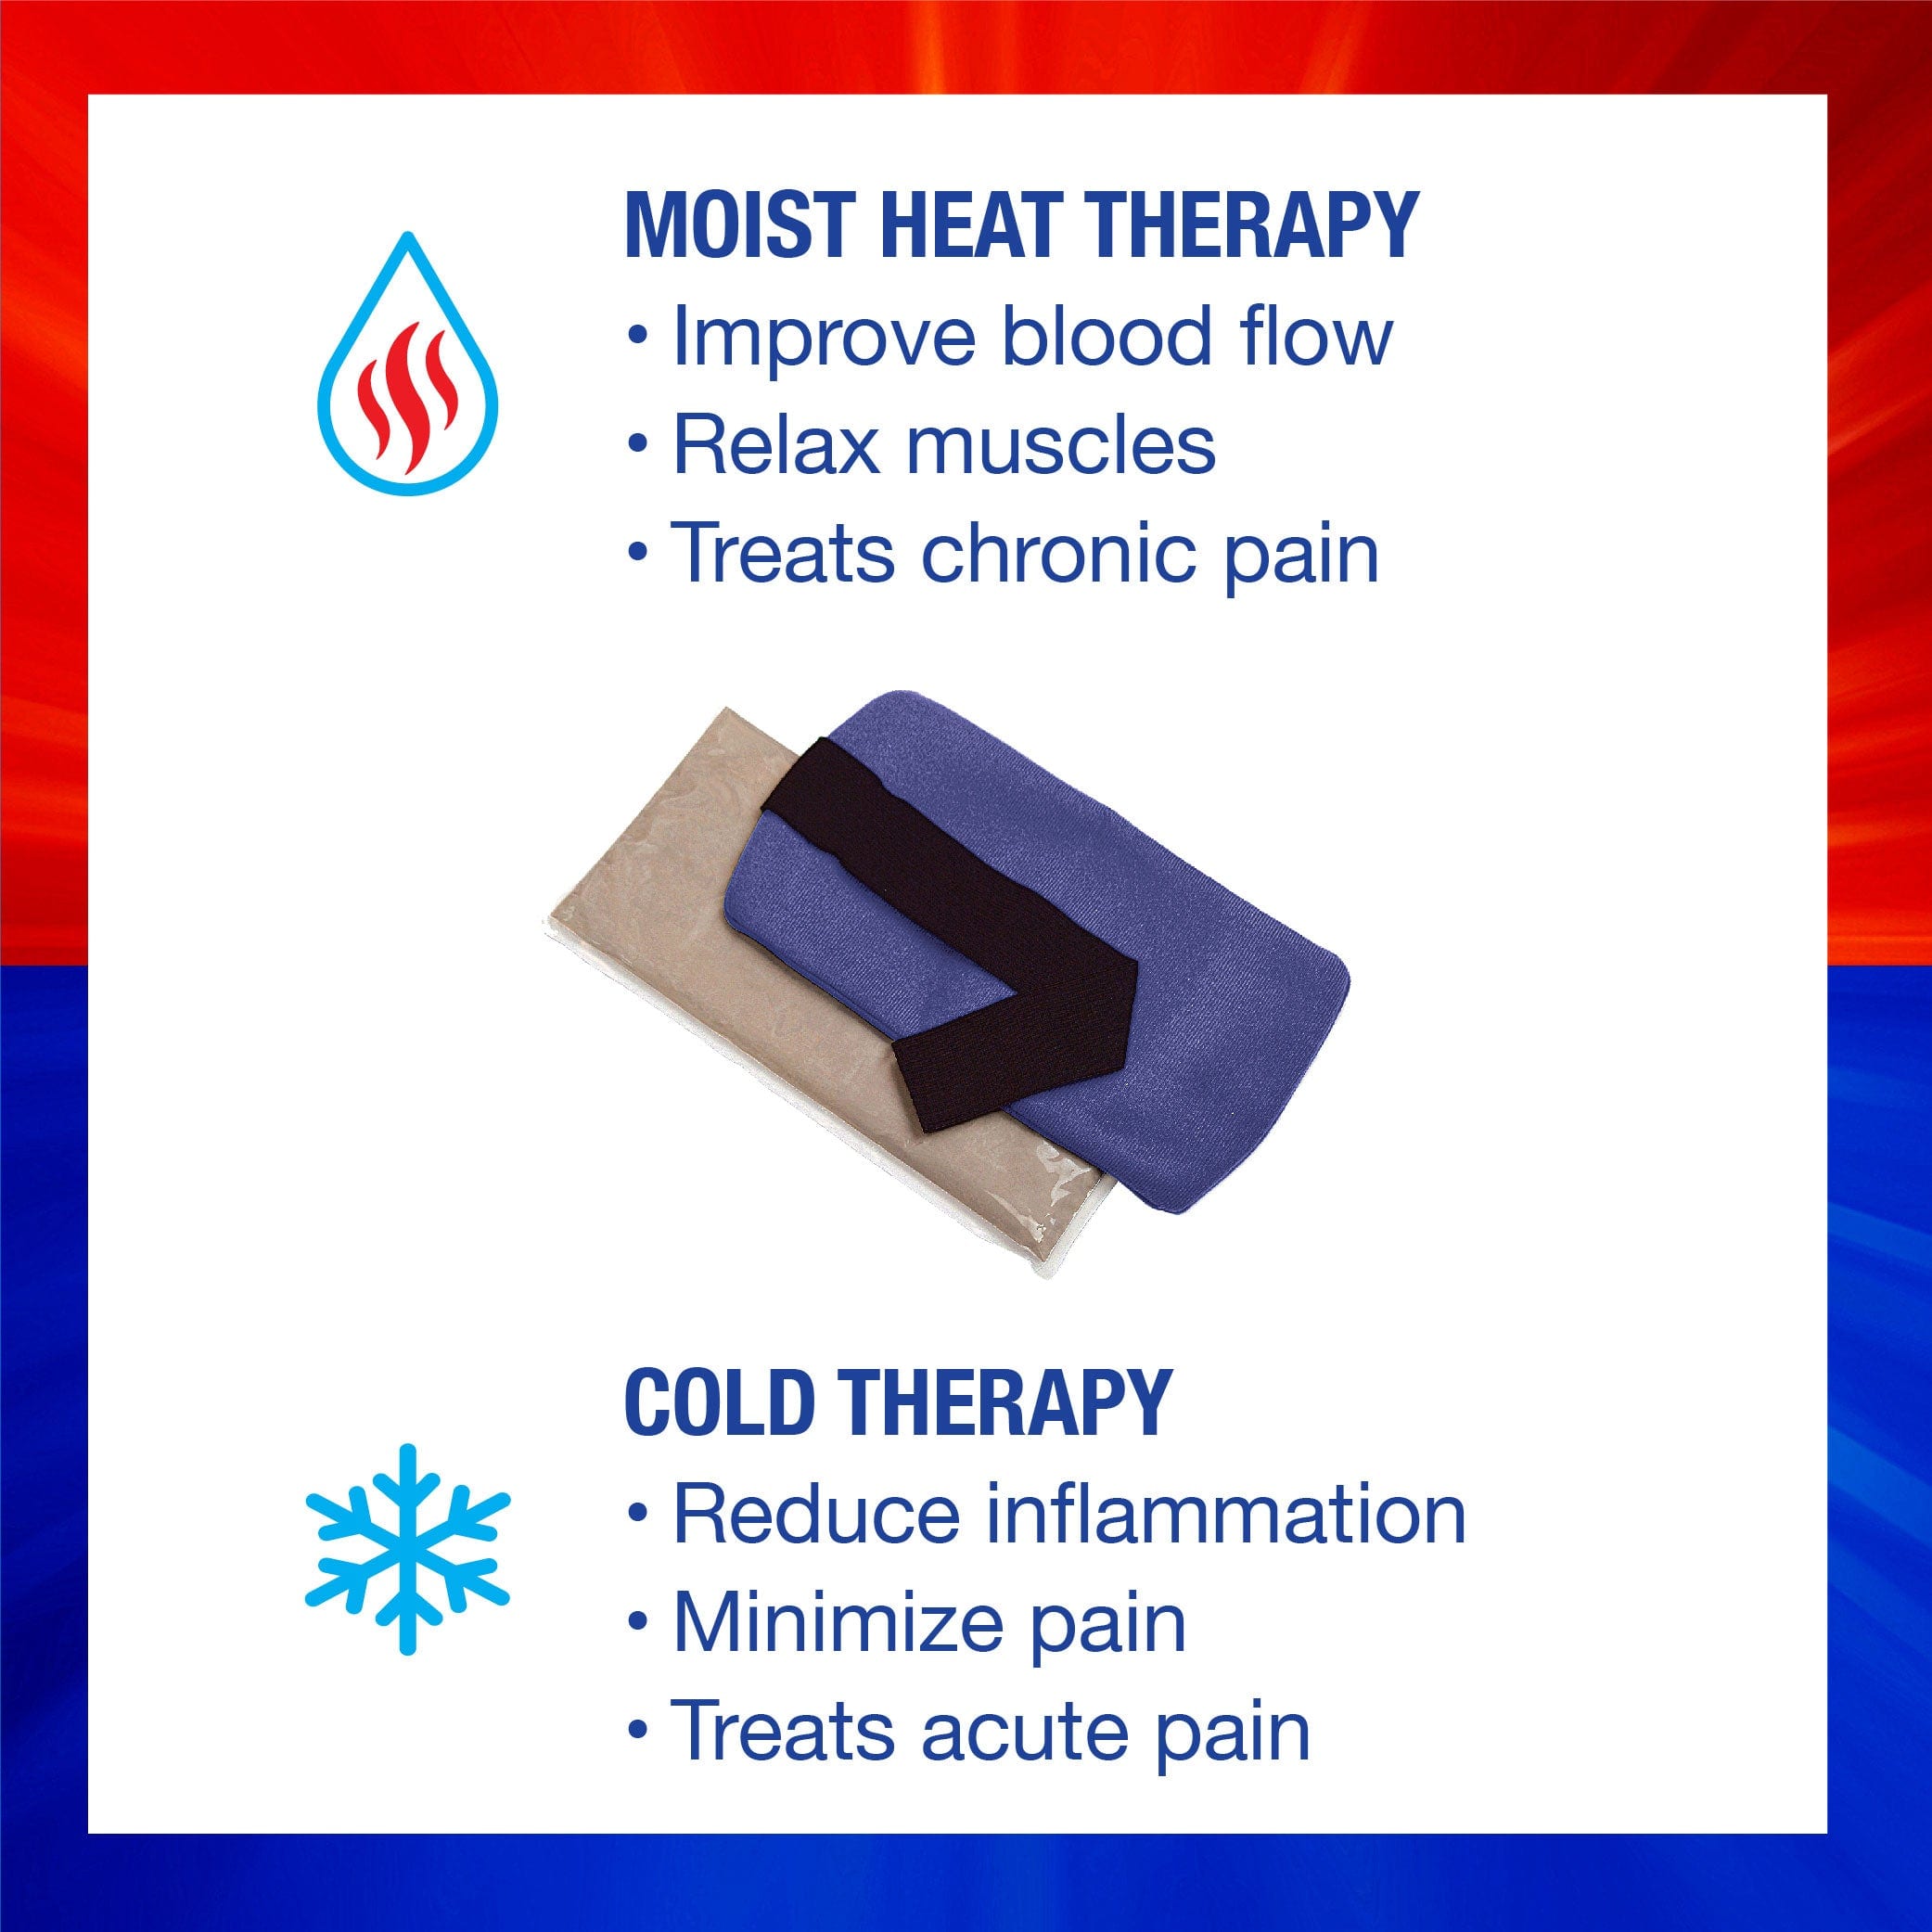 ThermiPaq Hot/Cold Pain Relief Wrap - Moist heat therapy: improve blood flow, relax muscles, treats chronic pain - Cold therapy: reduce inflammation, minimize pain, treats acute pain